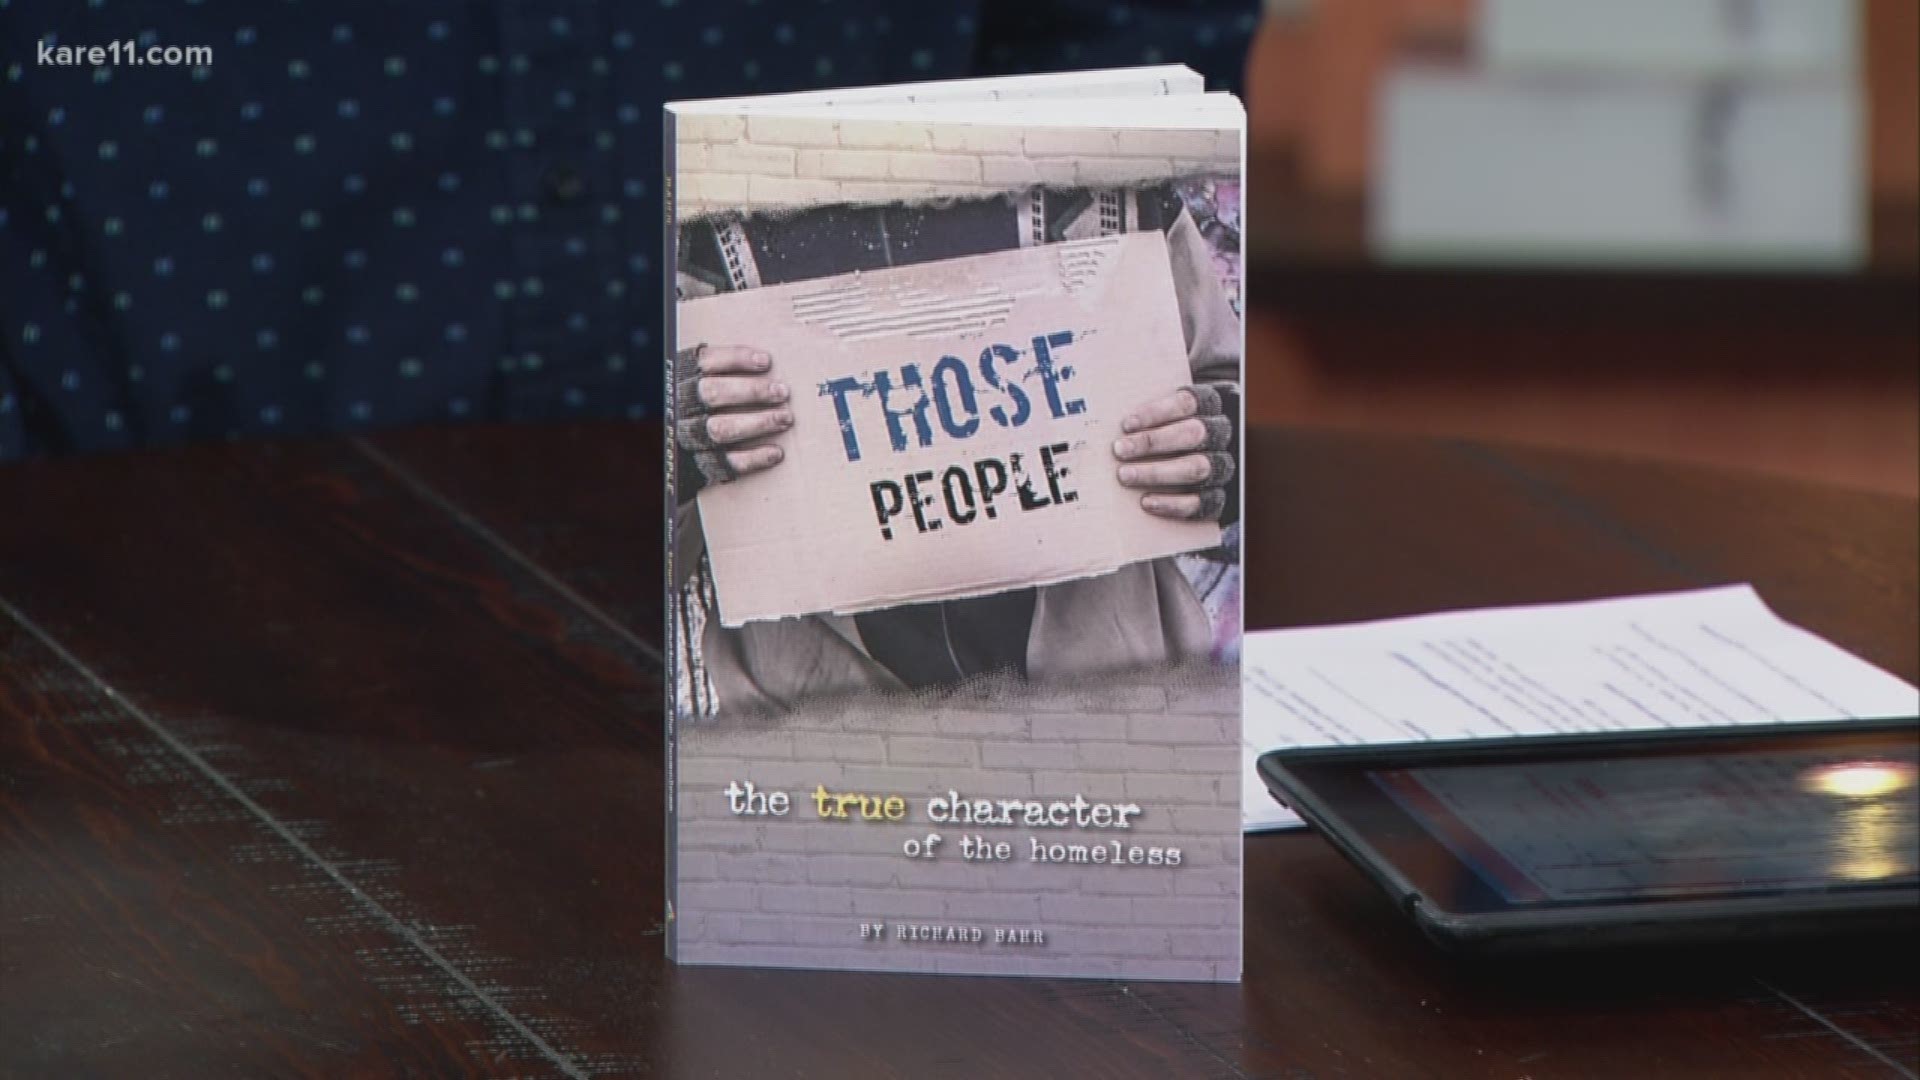 "Those People: The True Character of the Homeless" shares the personal stories of people he has met on the streets.